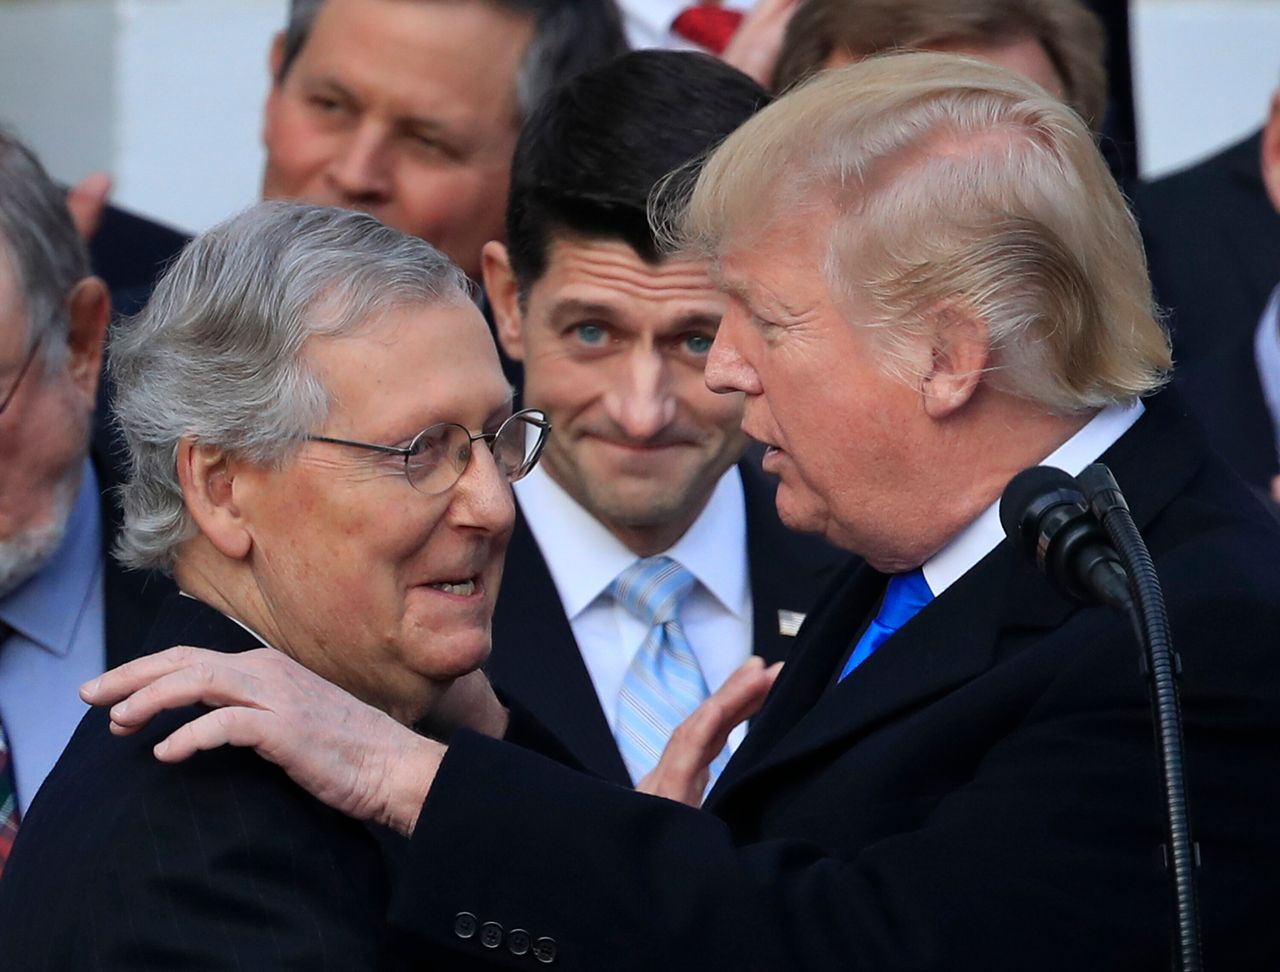 Left to right: Senate Majority Leader Mitch McConnell (R-Ky.), House Speaker Paul Ryan (R-Wis.) and President Donald Trump looking chummy in 2017.